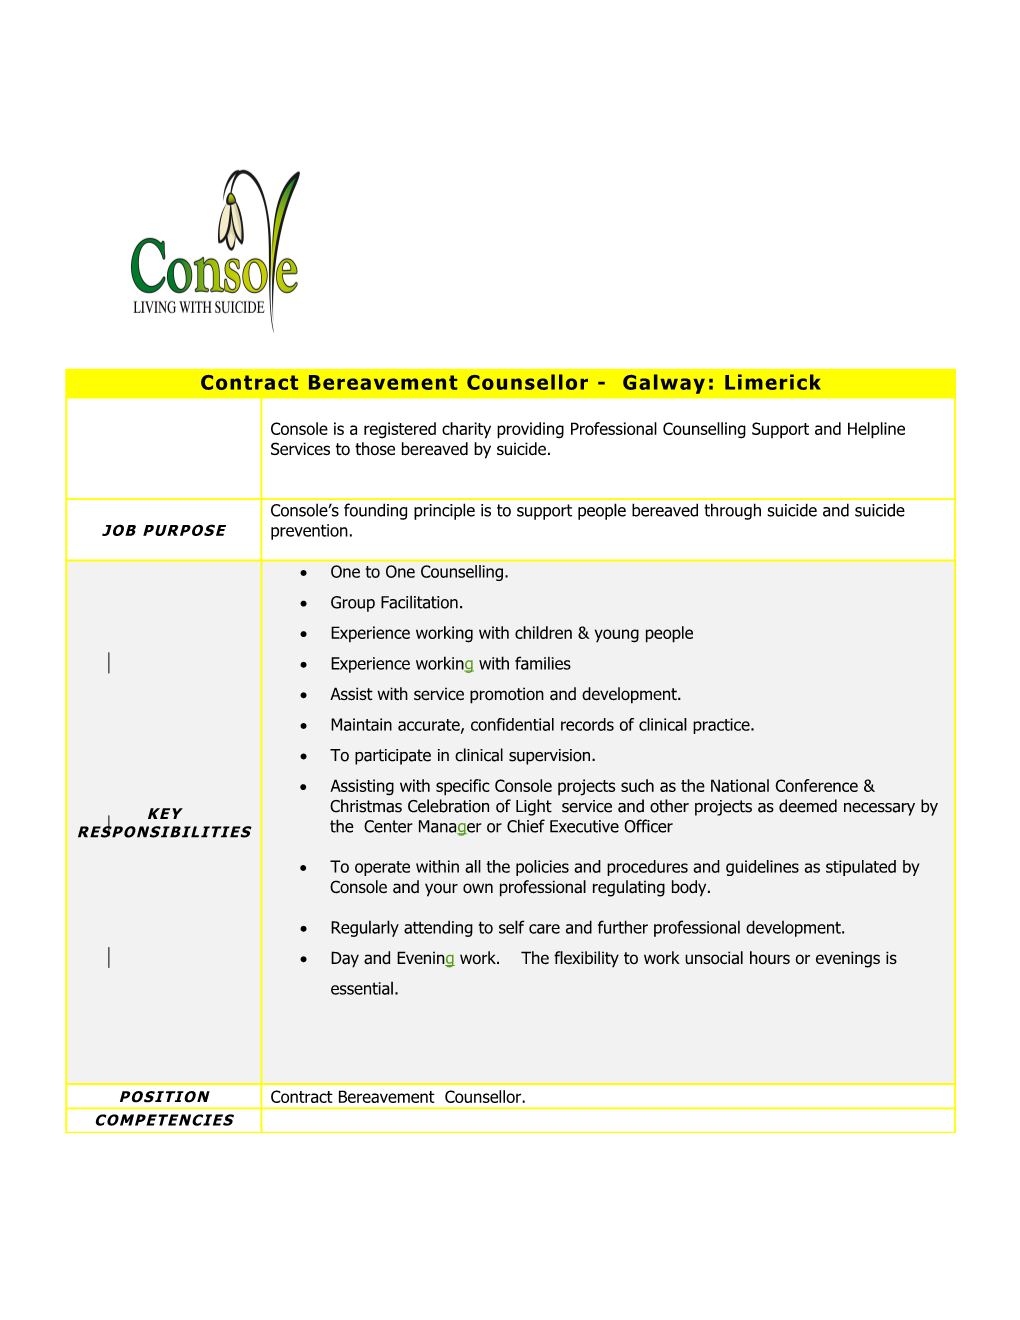 Contract Bereavement Counsellor - Galway: Limerick